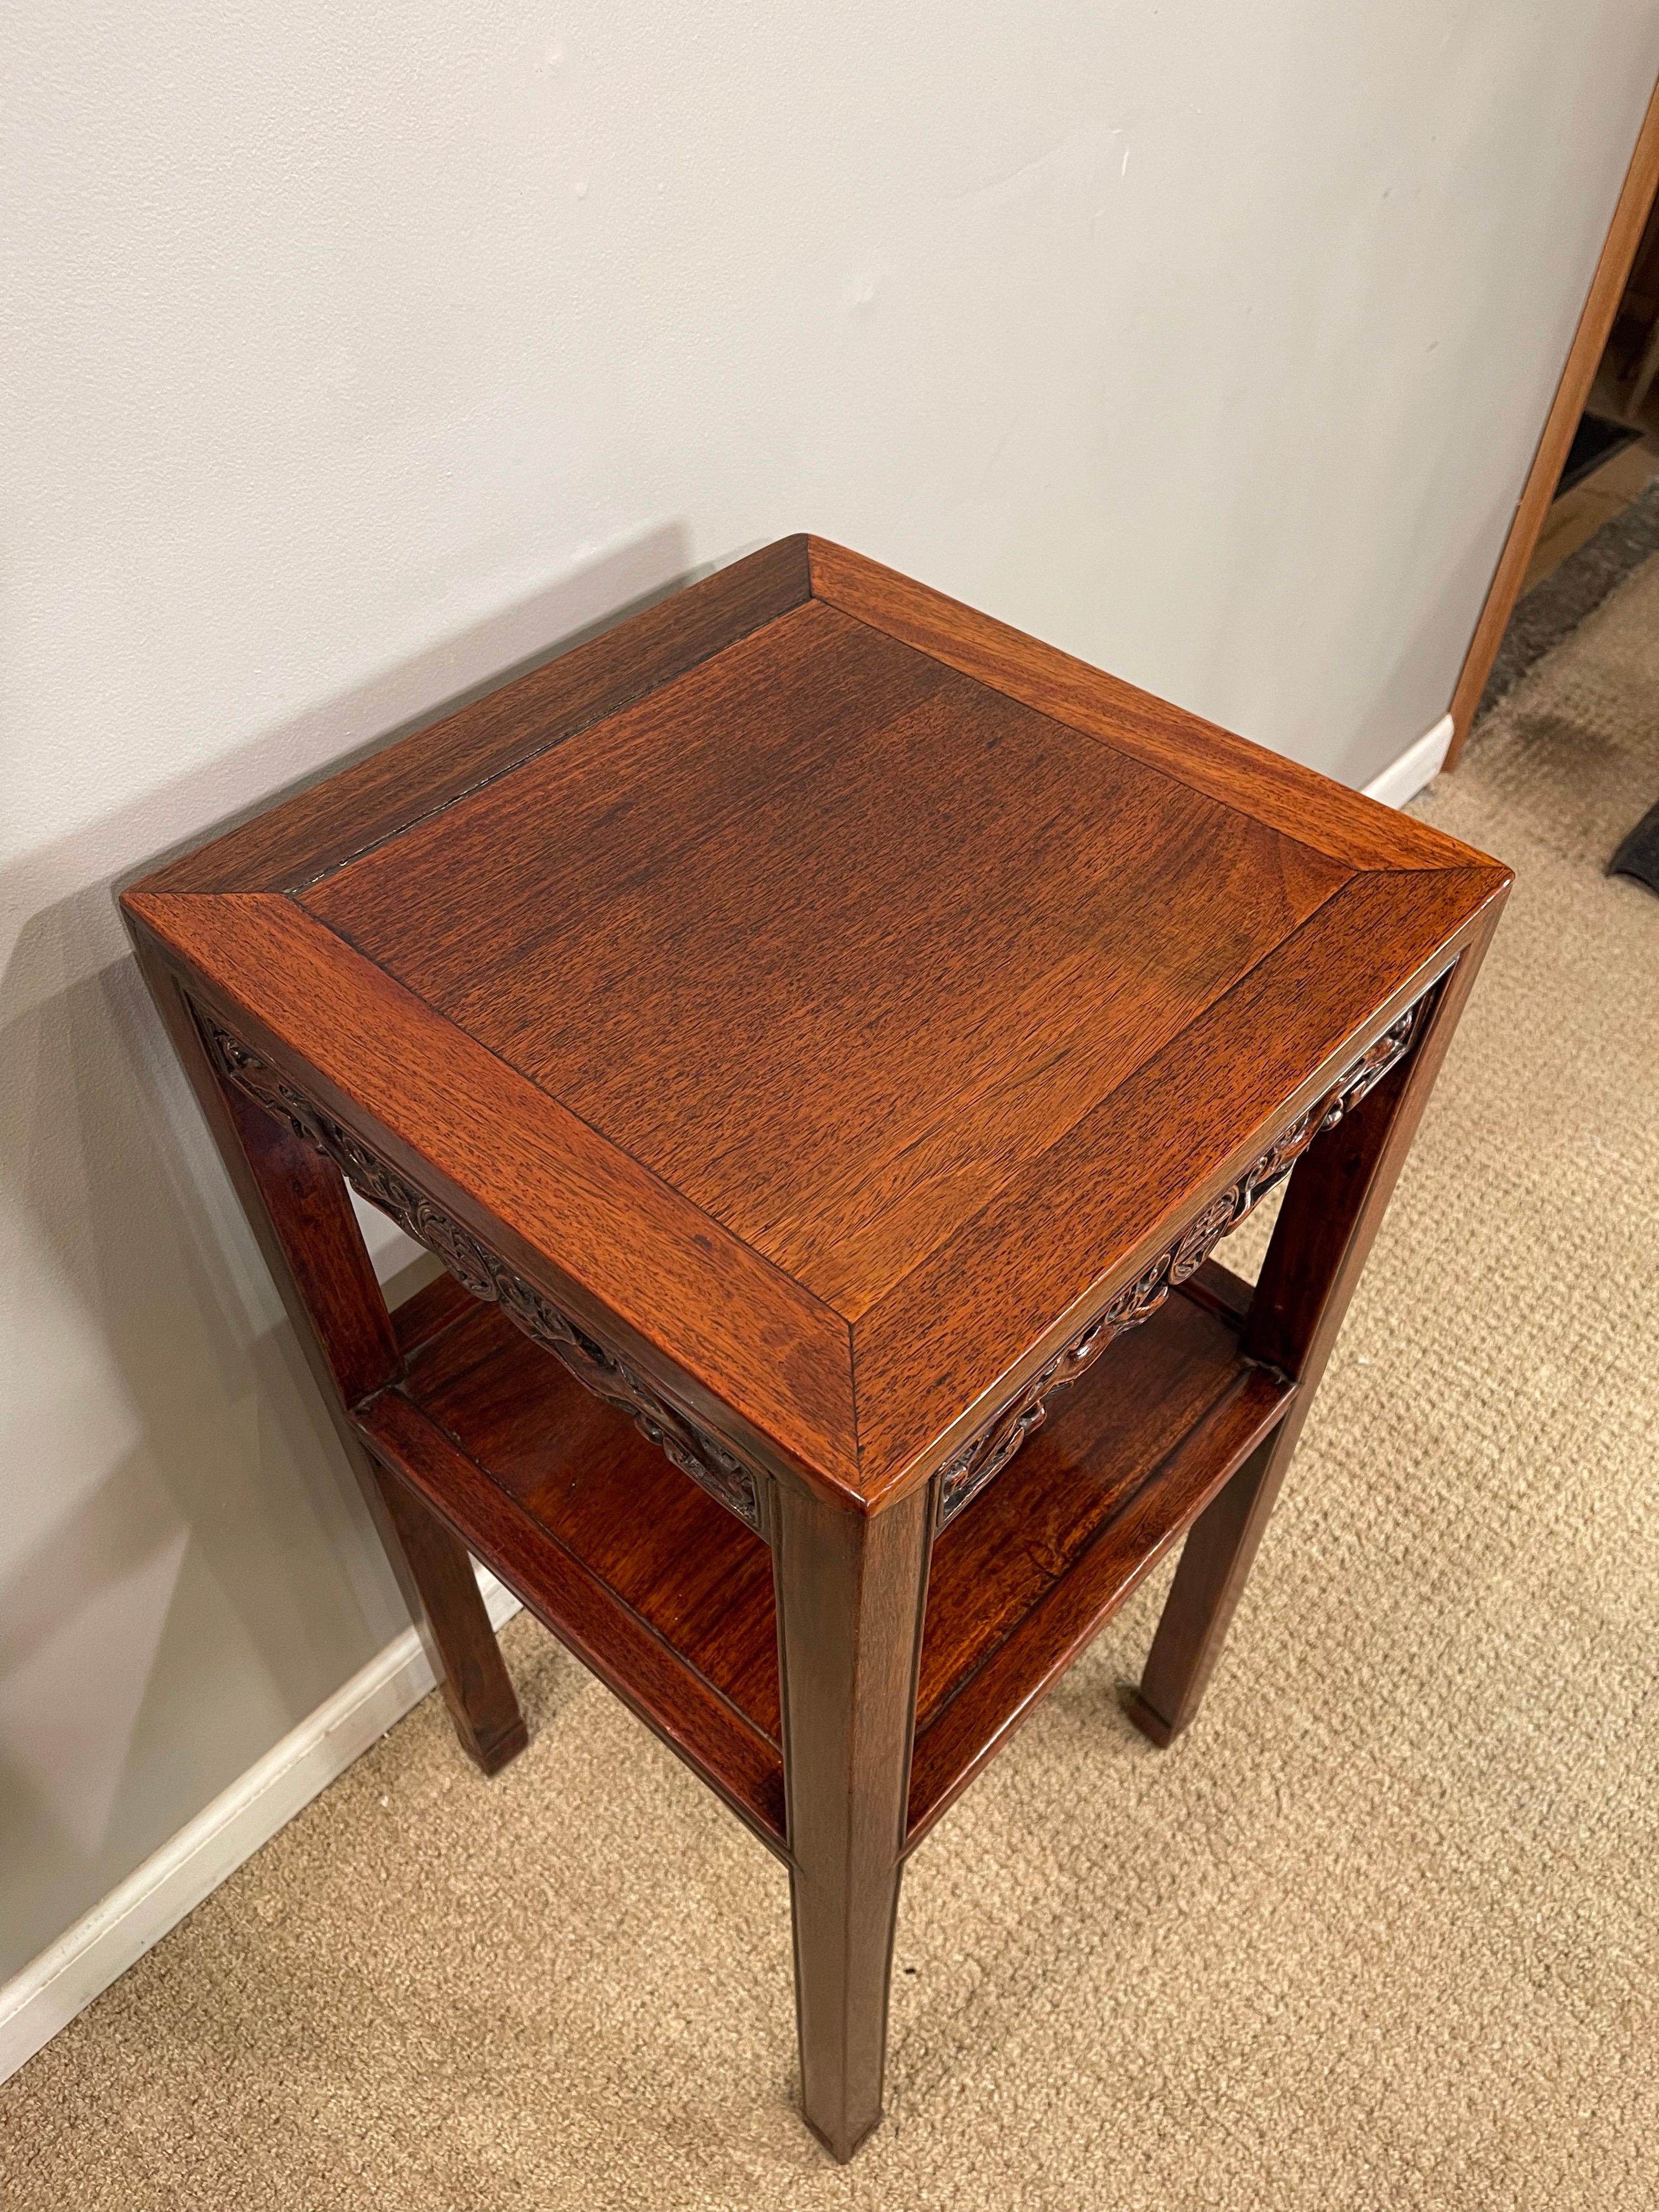 Chinese Hardwood 'Hungmu' Tea Table, Late 19th Century / Early 20th Century 3